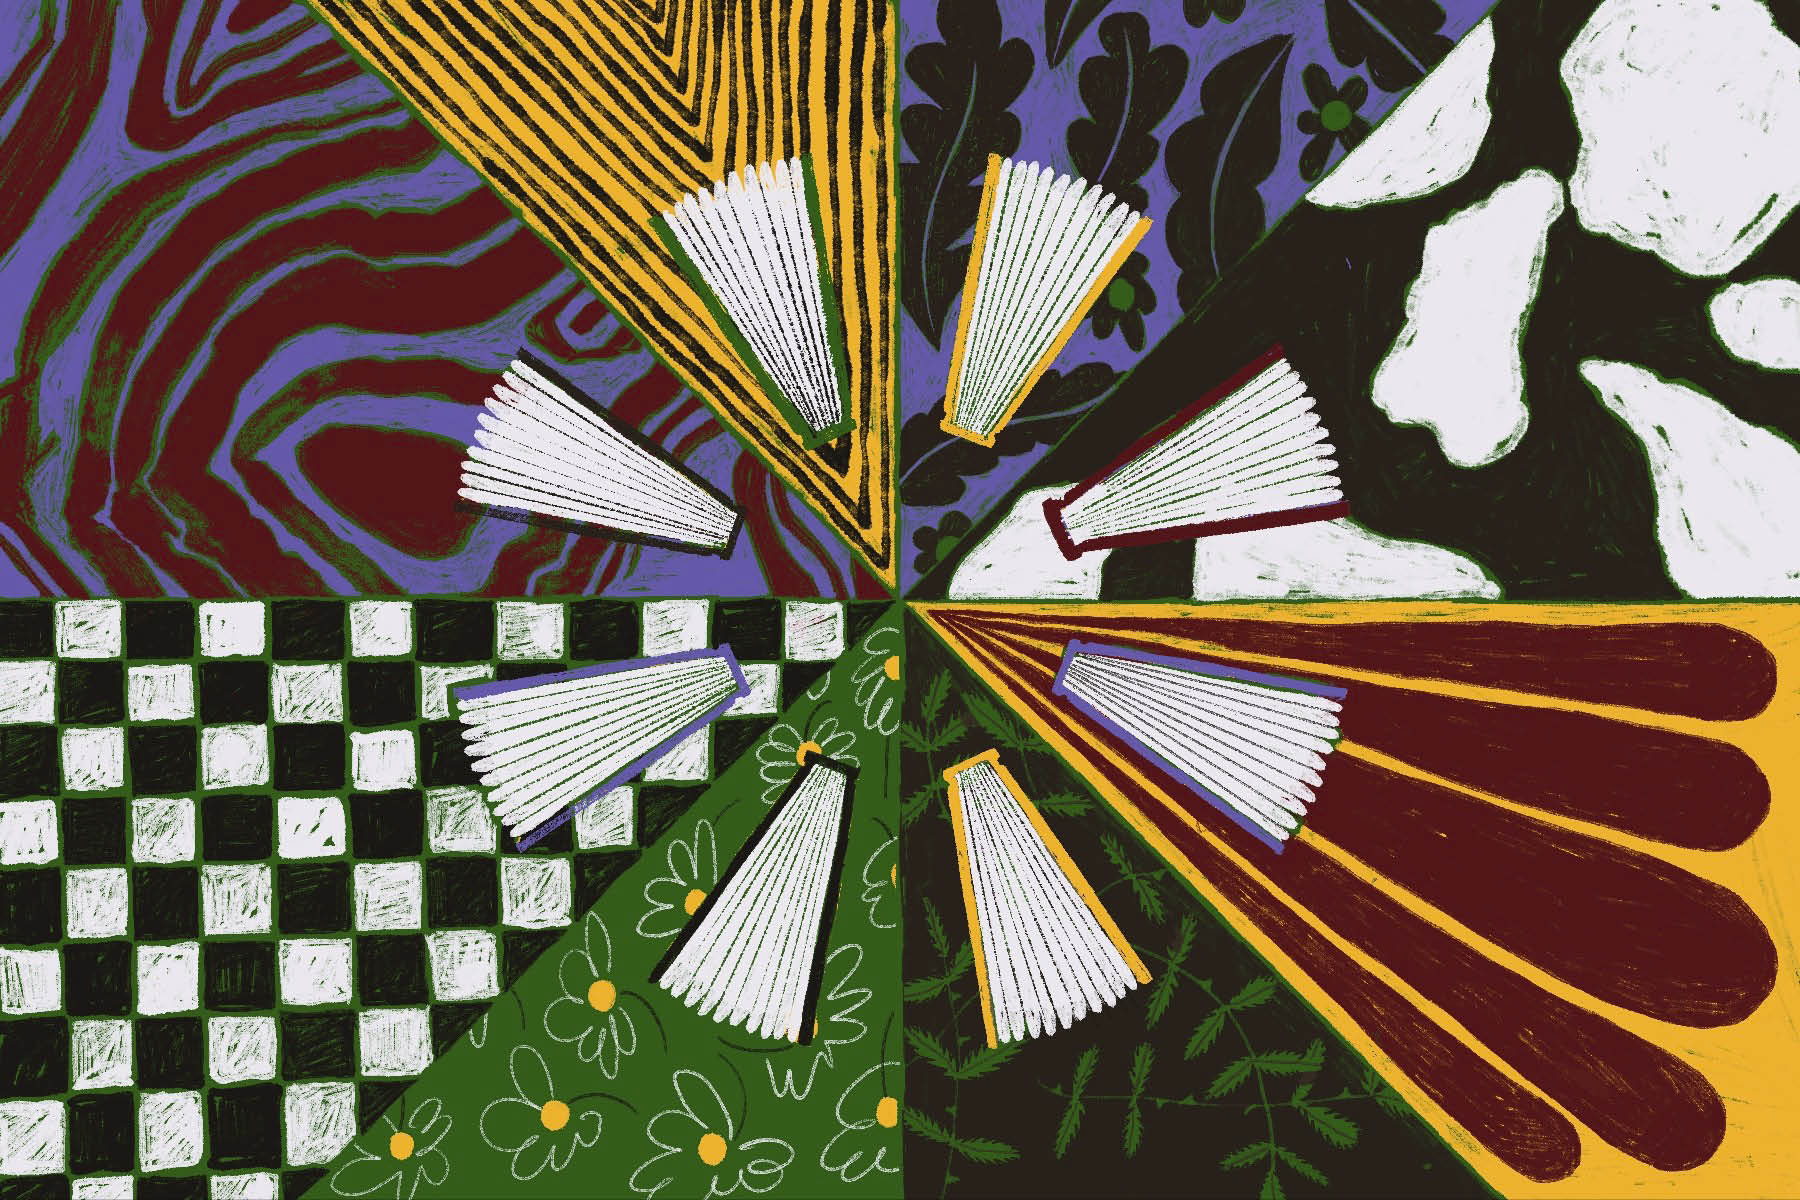 An illustration of eight books seen from above in a circle on a kaleidoscopic background of patterns and colours